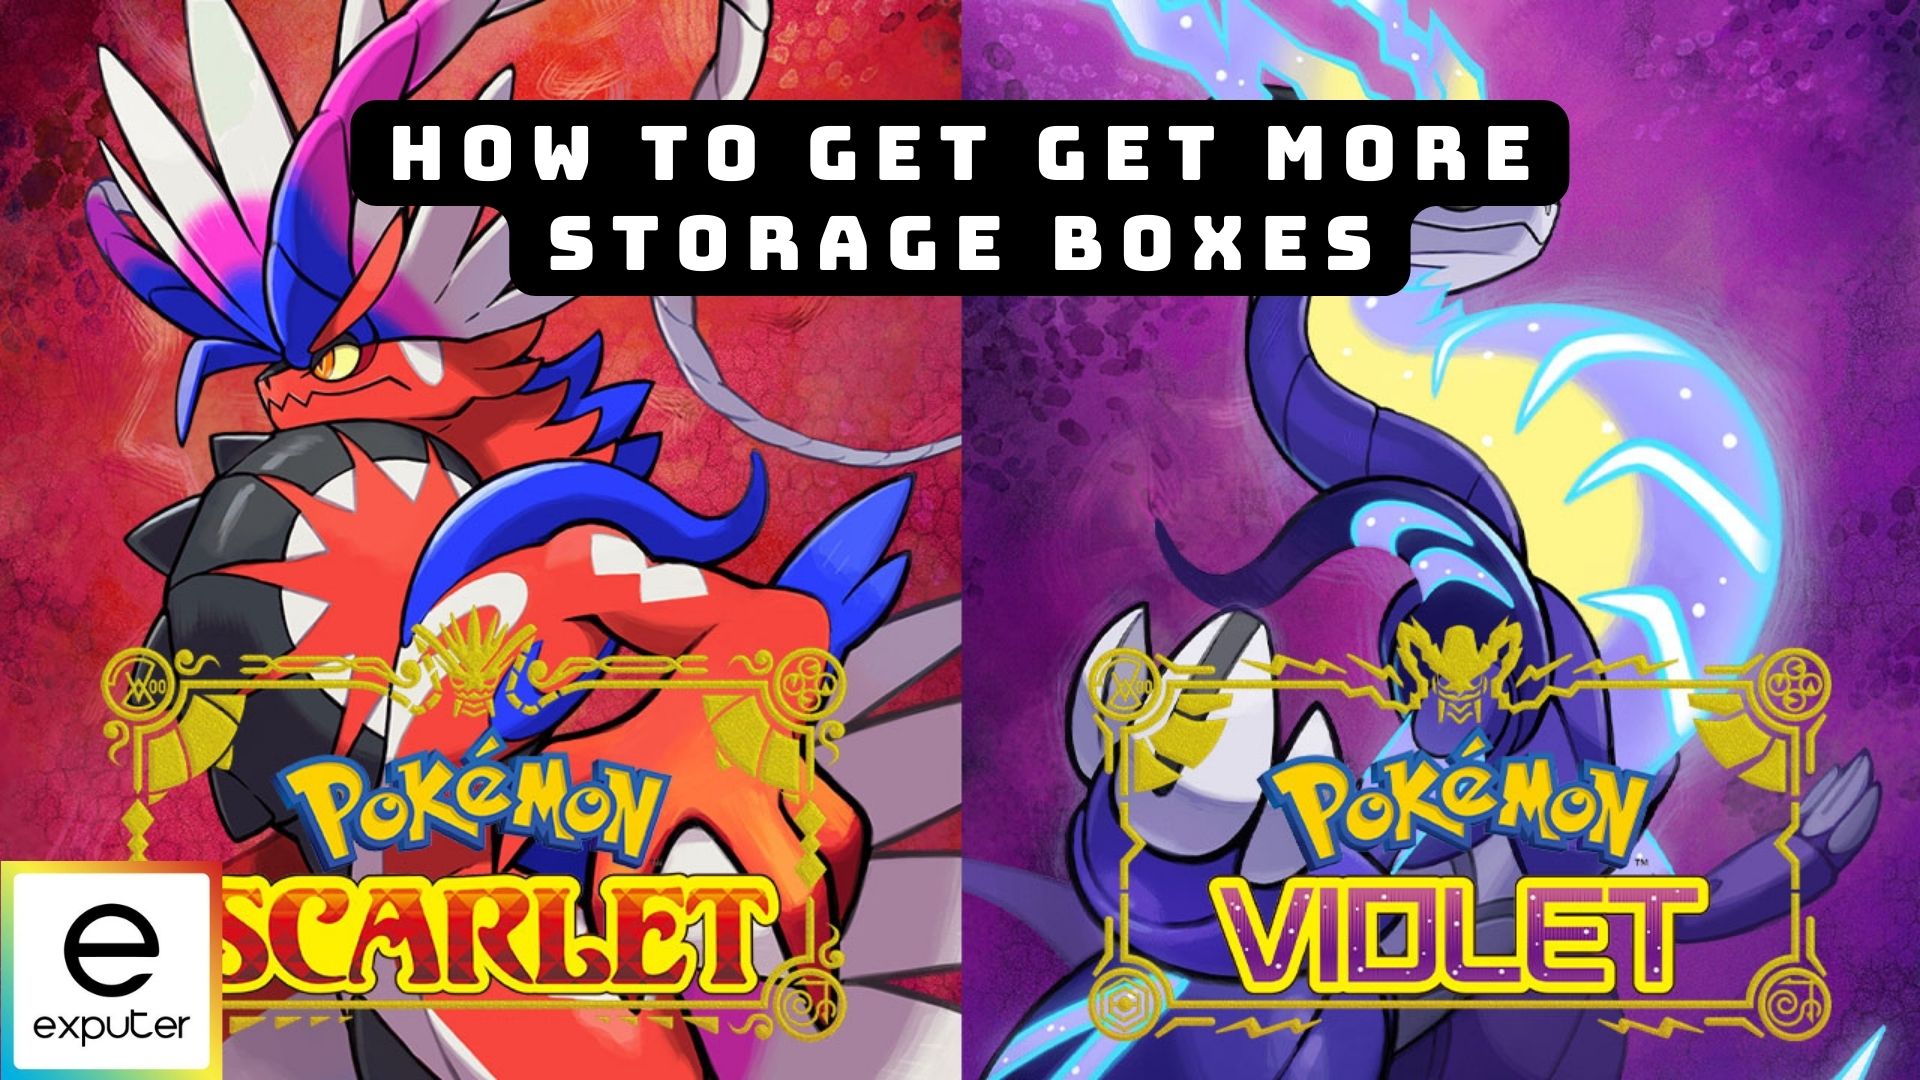 Method of getting more storage boxes